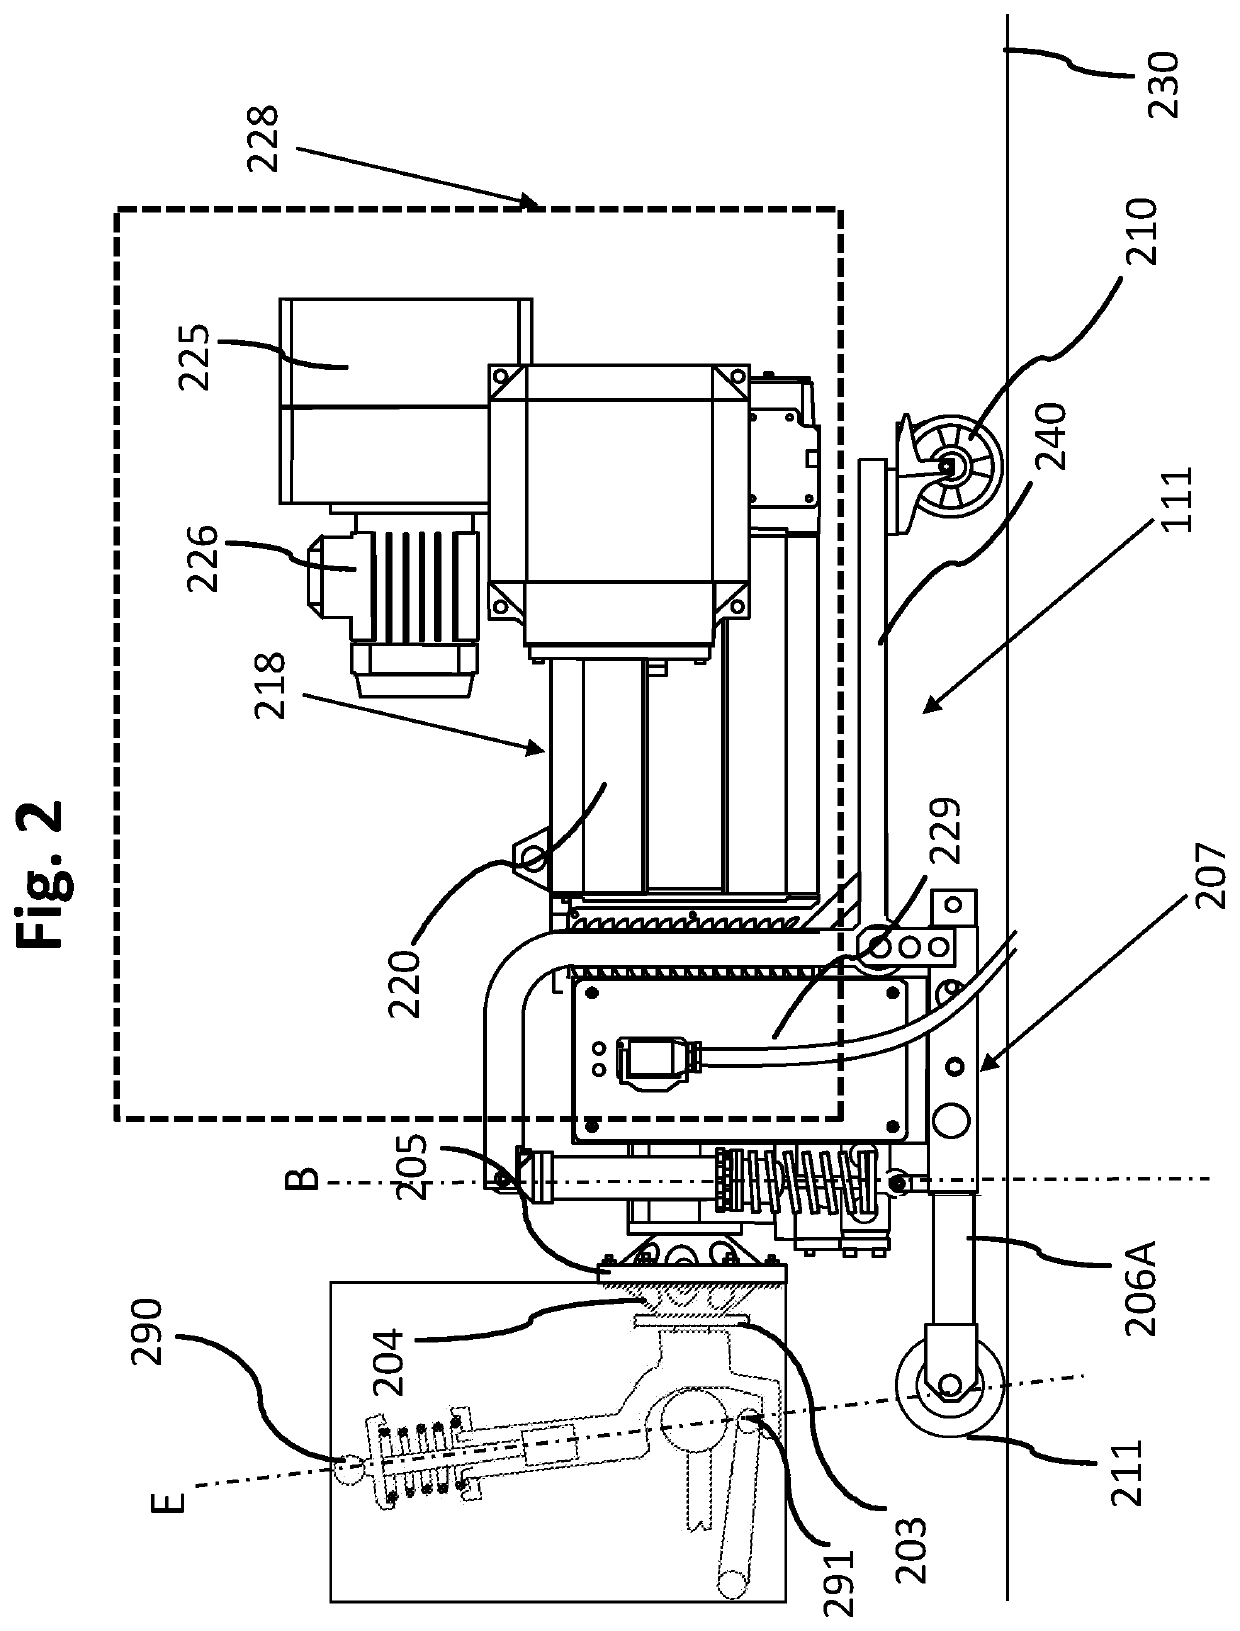 Method and apparatus for dynamometer testing of a motor vehicle